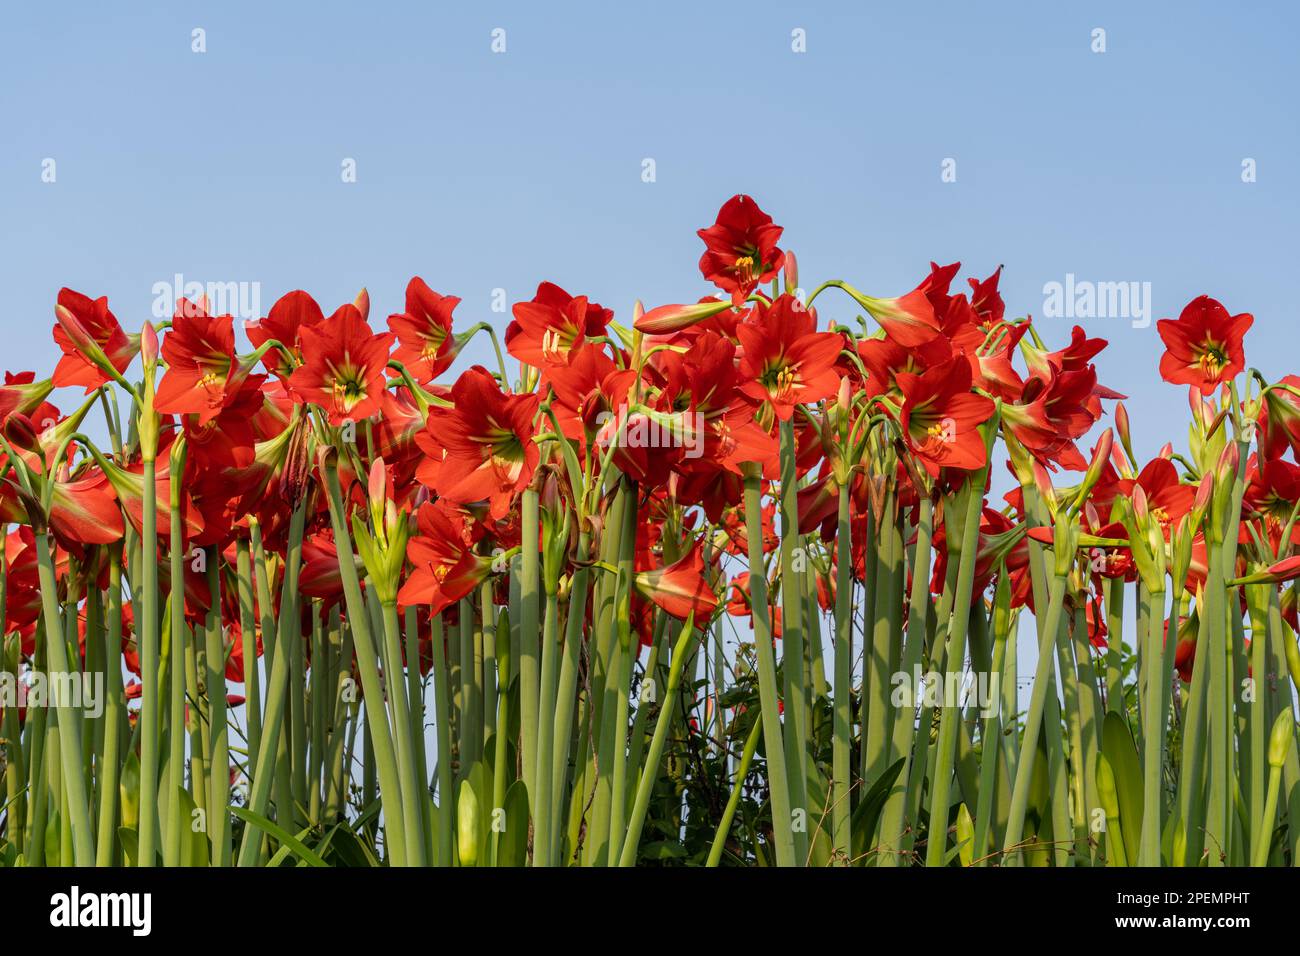 Closeup view of red flowers of hippeastrum puniceaum aka Barbados lily, Easter lily or cacao lily blooming outdoors isolated on blue sky background Stock Photo